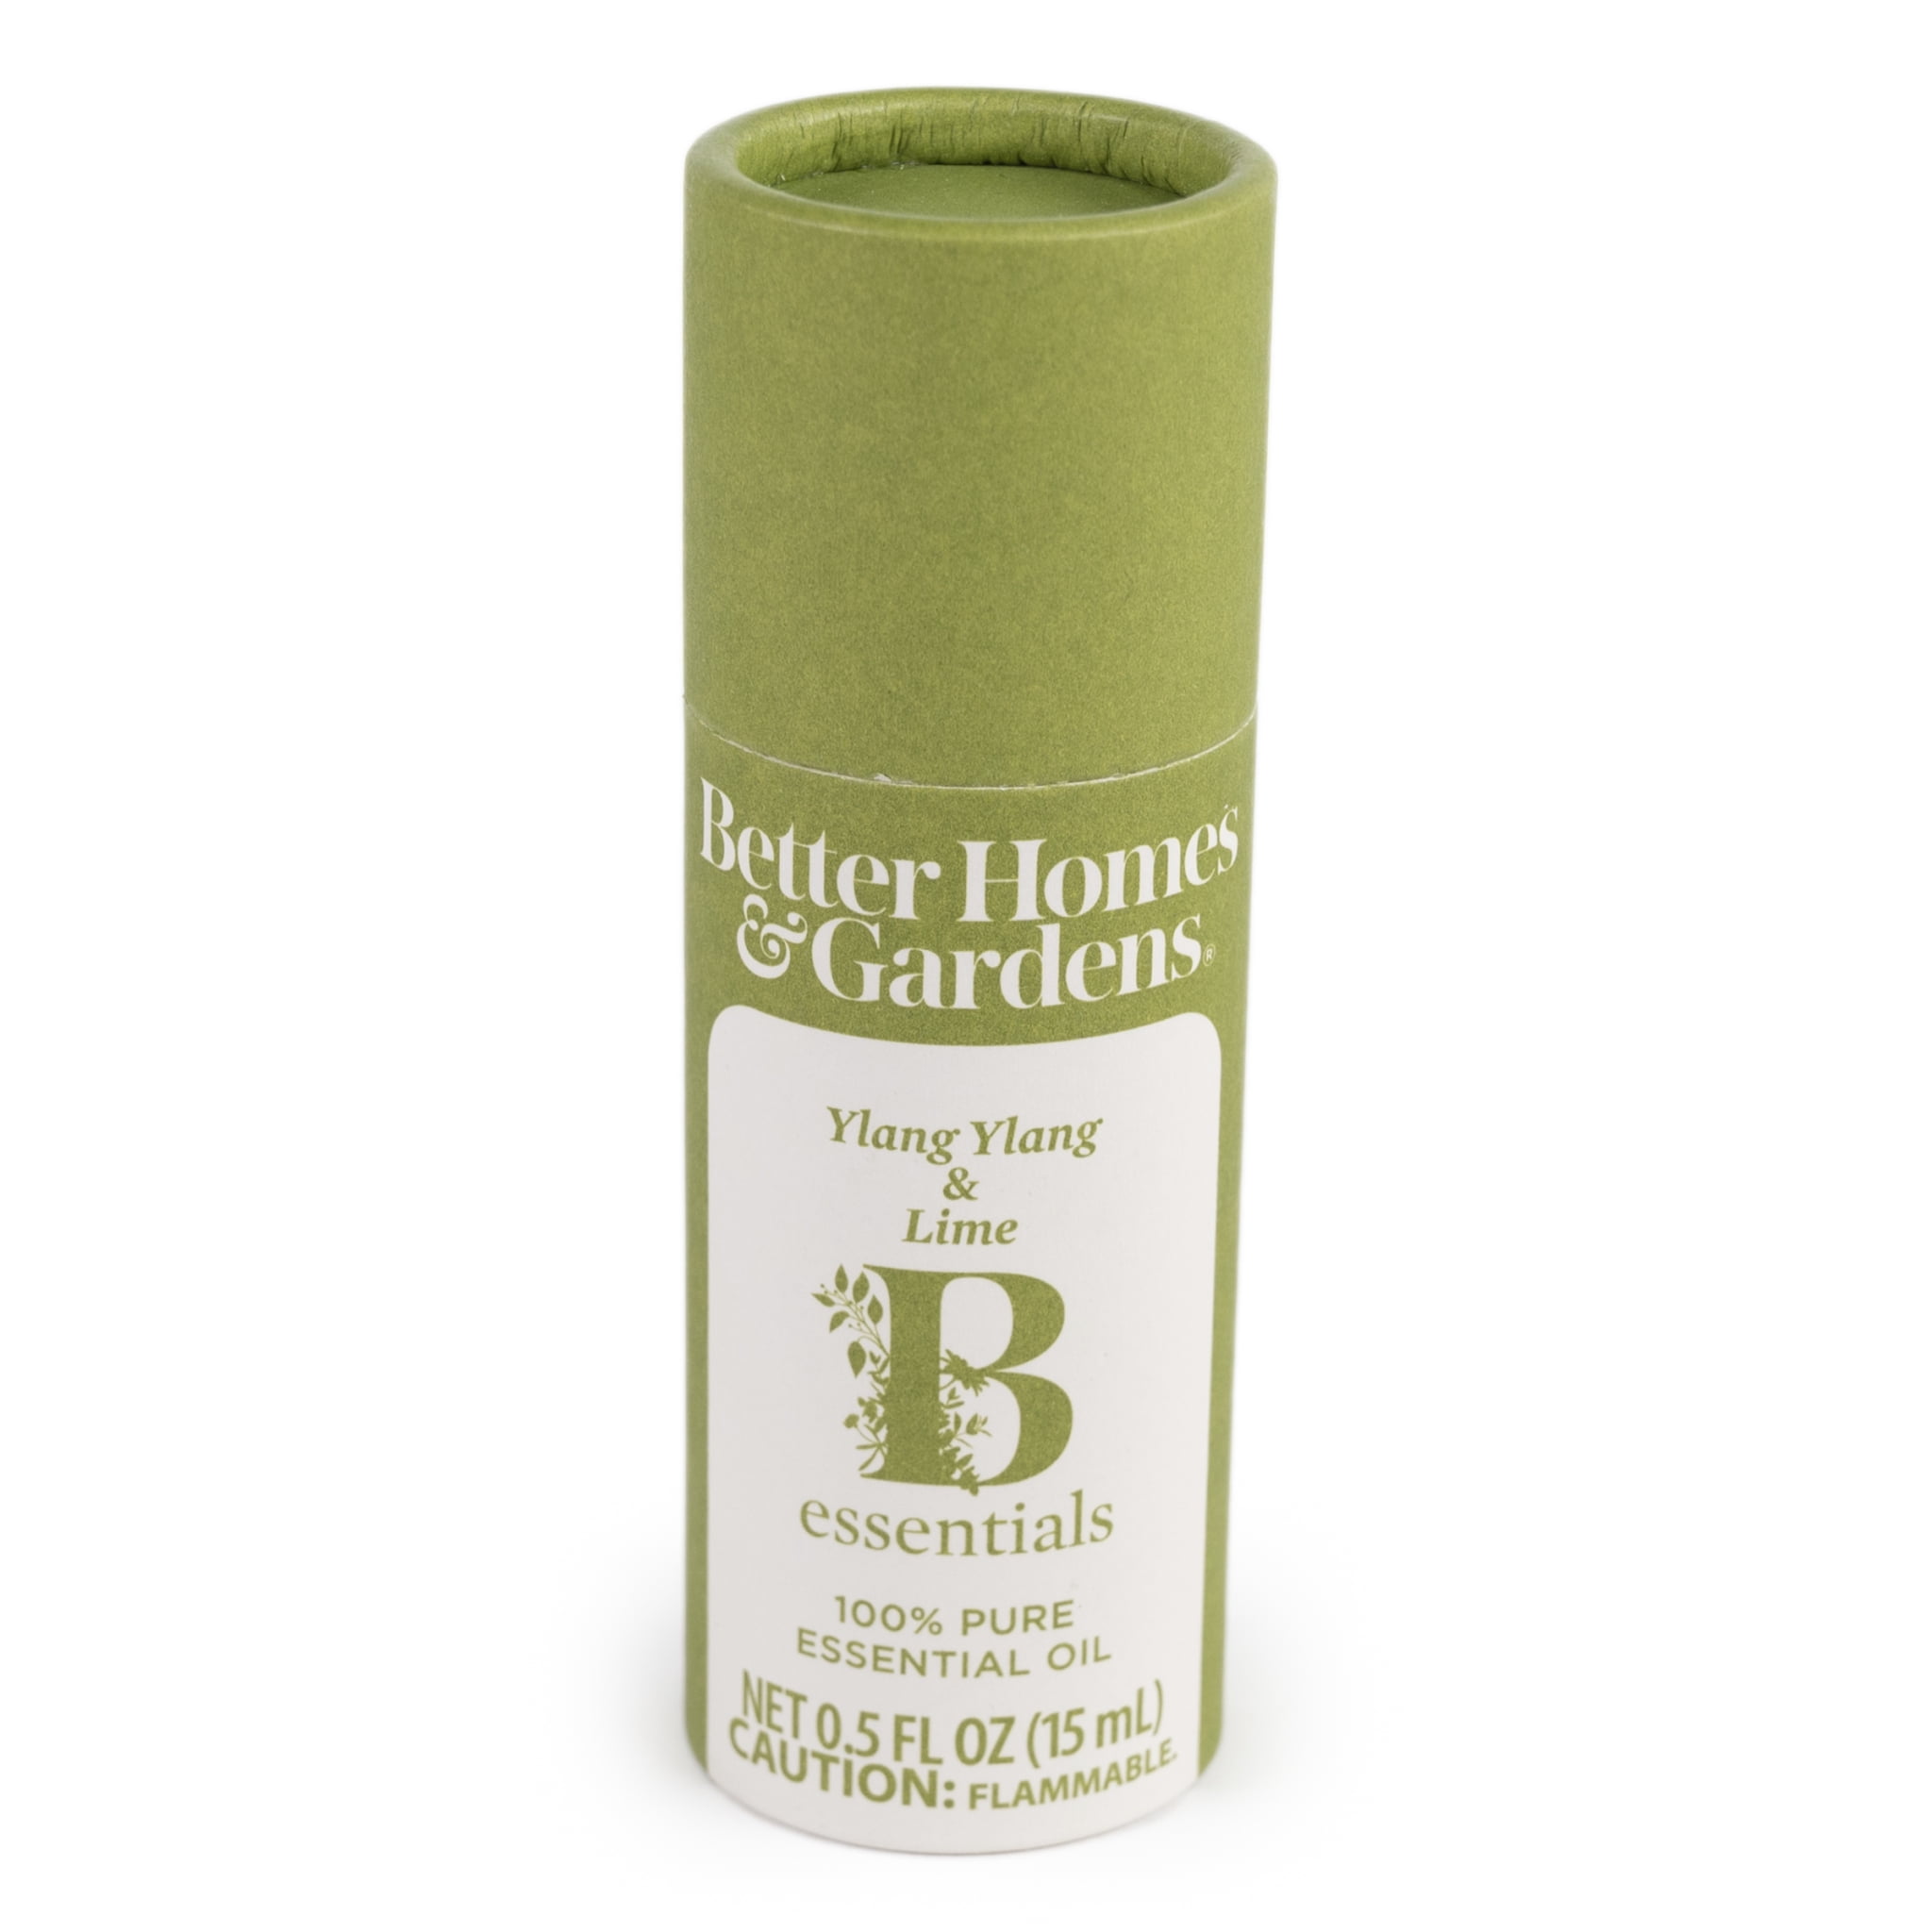 Better Homes & Gardens 100% Pure Essential Oil: Ylang Ylang & Lime, 15mL